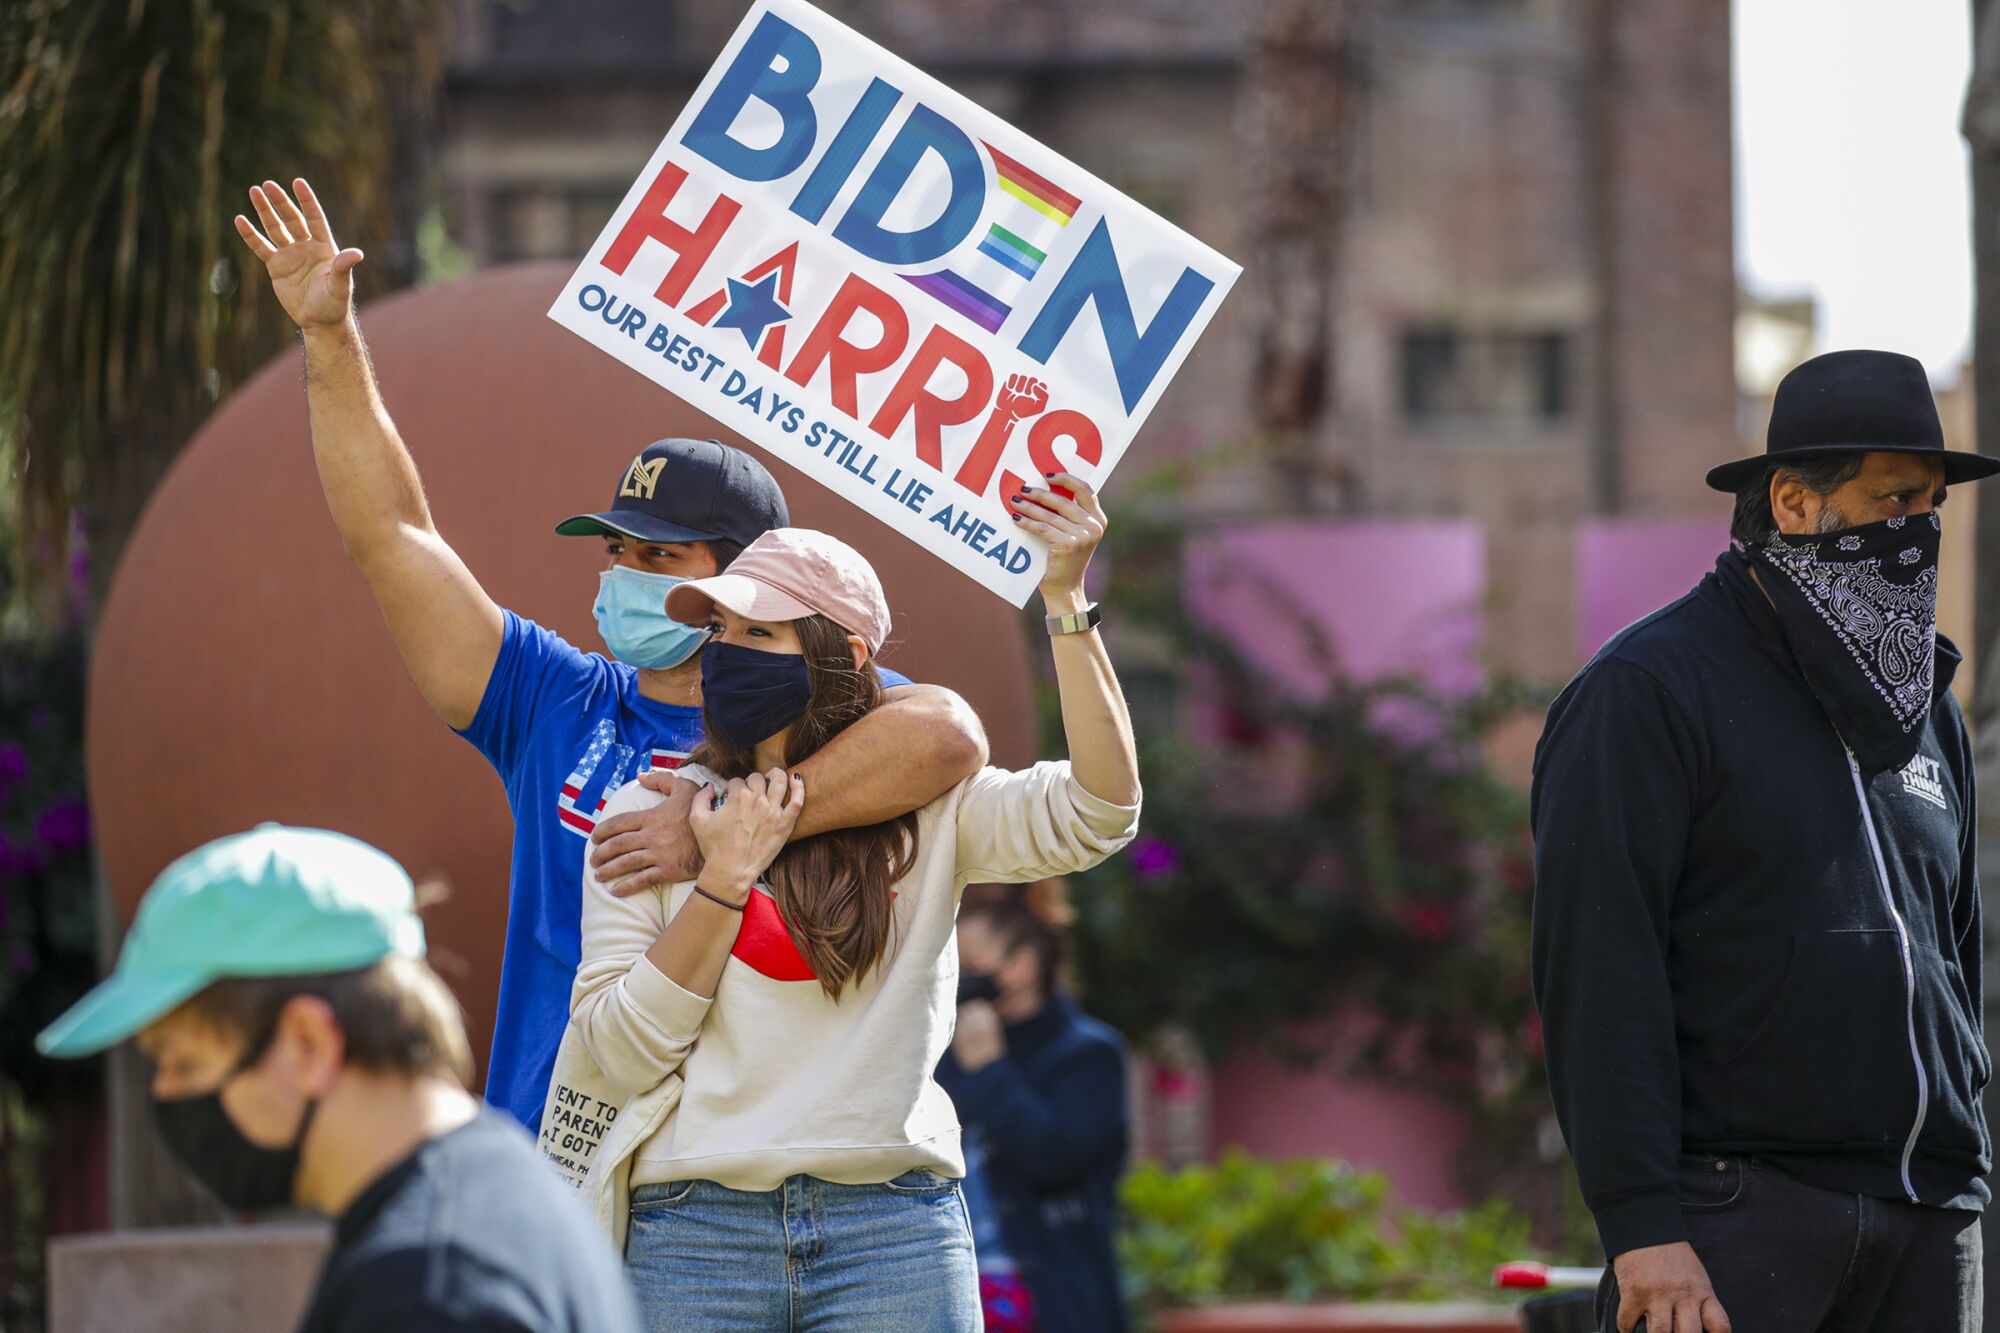 Two people hug and hold aloft a Biden-Harris sign